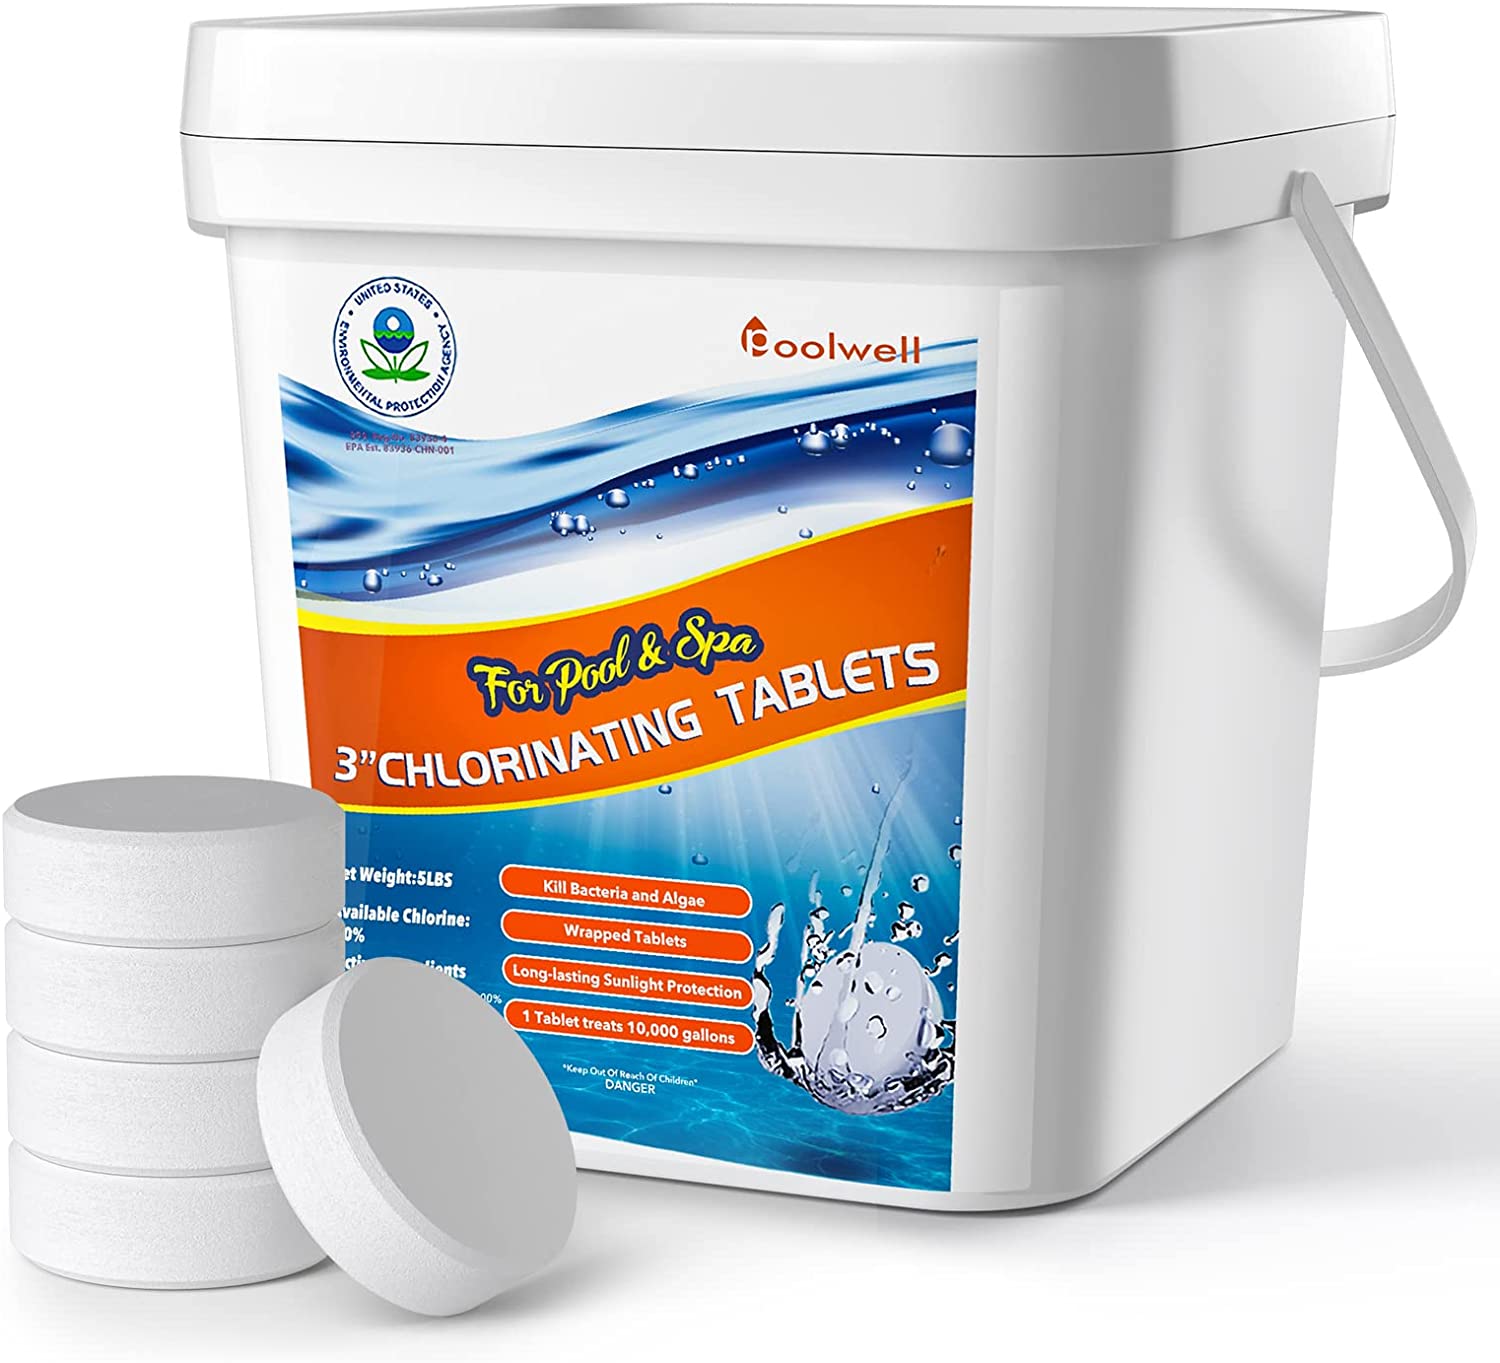 Review of POOLWELL Pool & SPA Chlorine Tablets